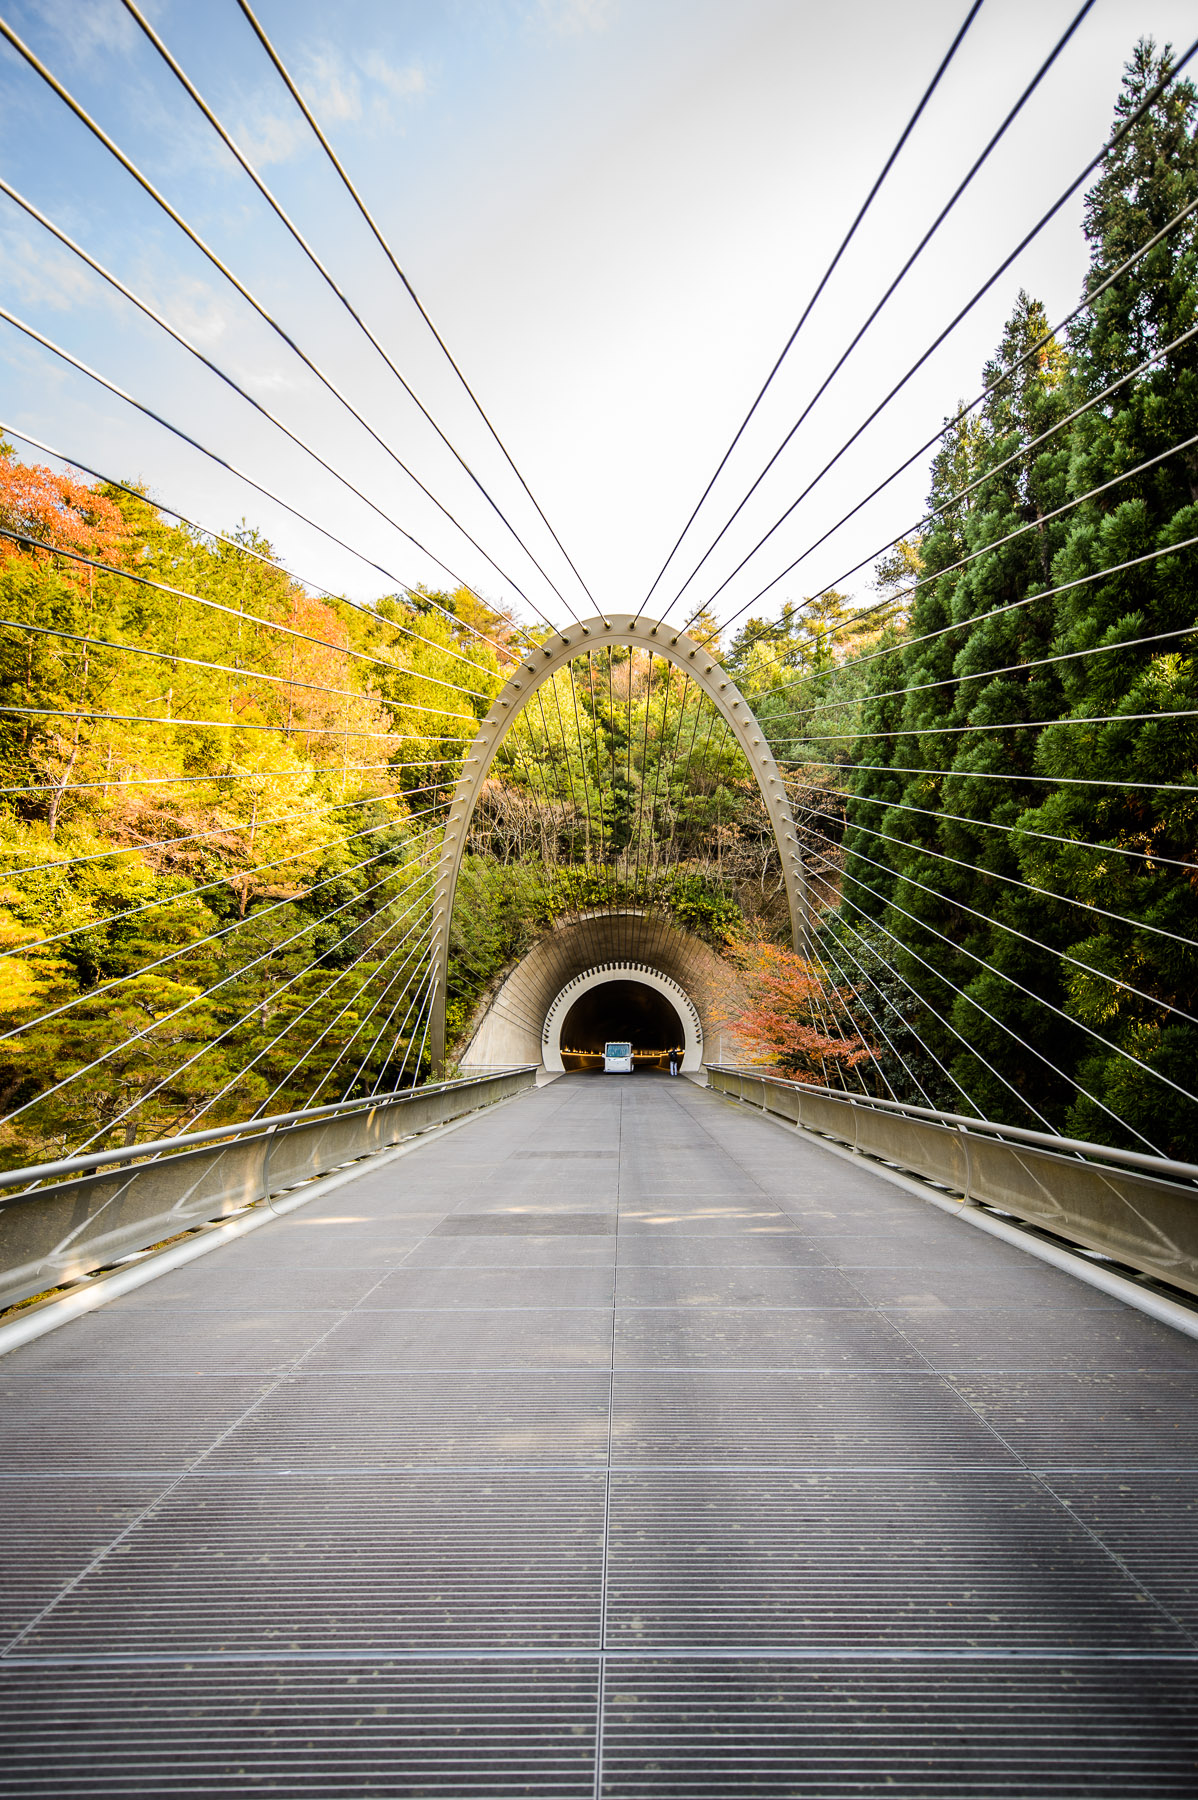 Miho Museum - a controversy or Shangri La - TravelFeed